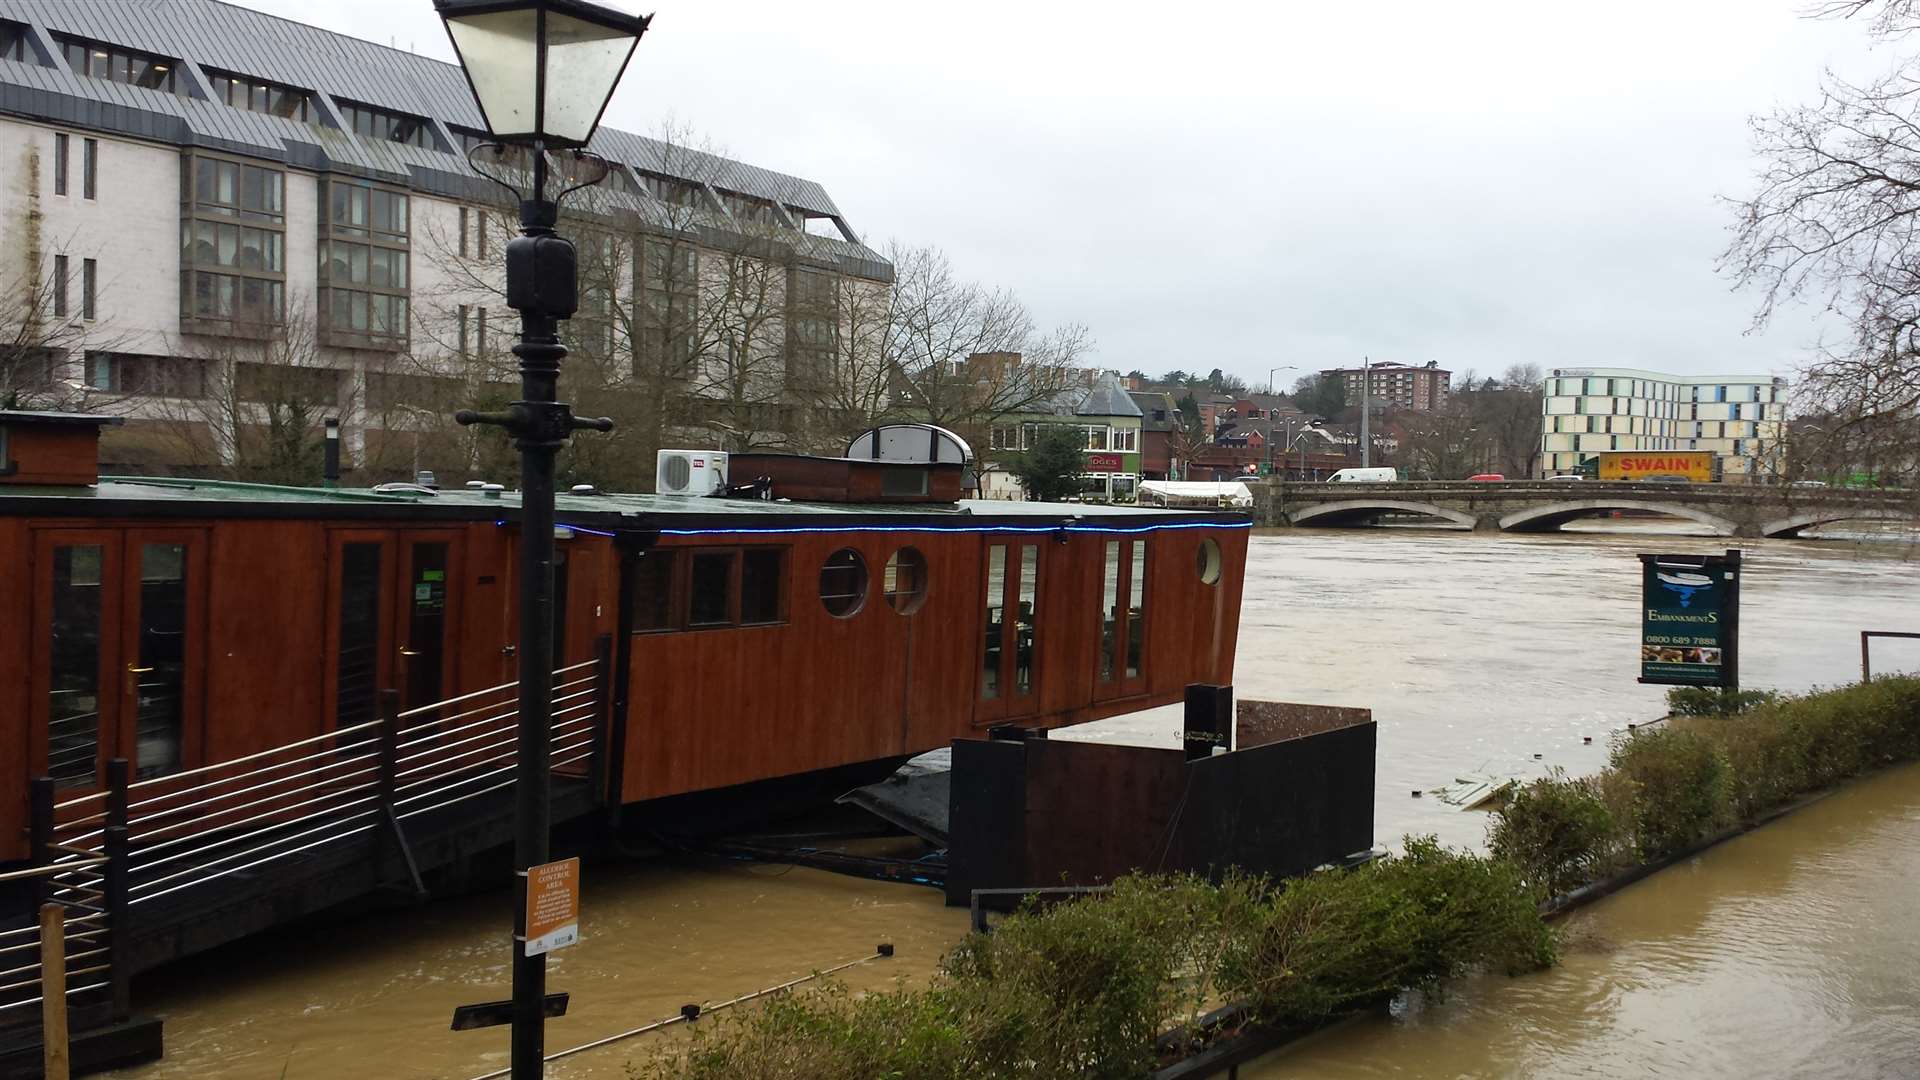 Pathways disappear under the swollen river in Maidstone